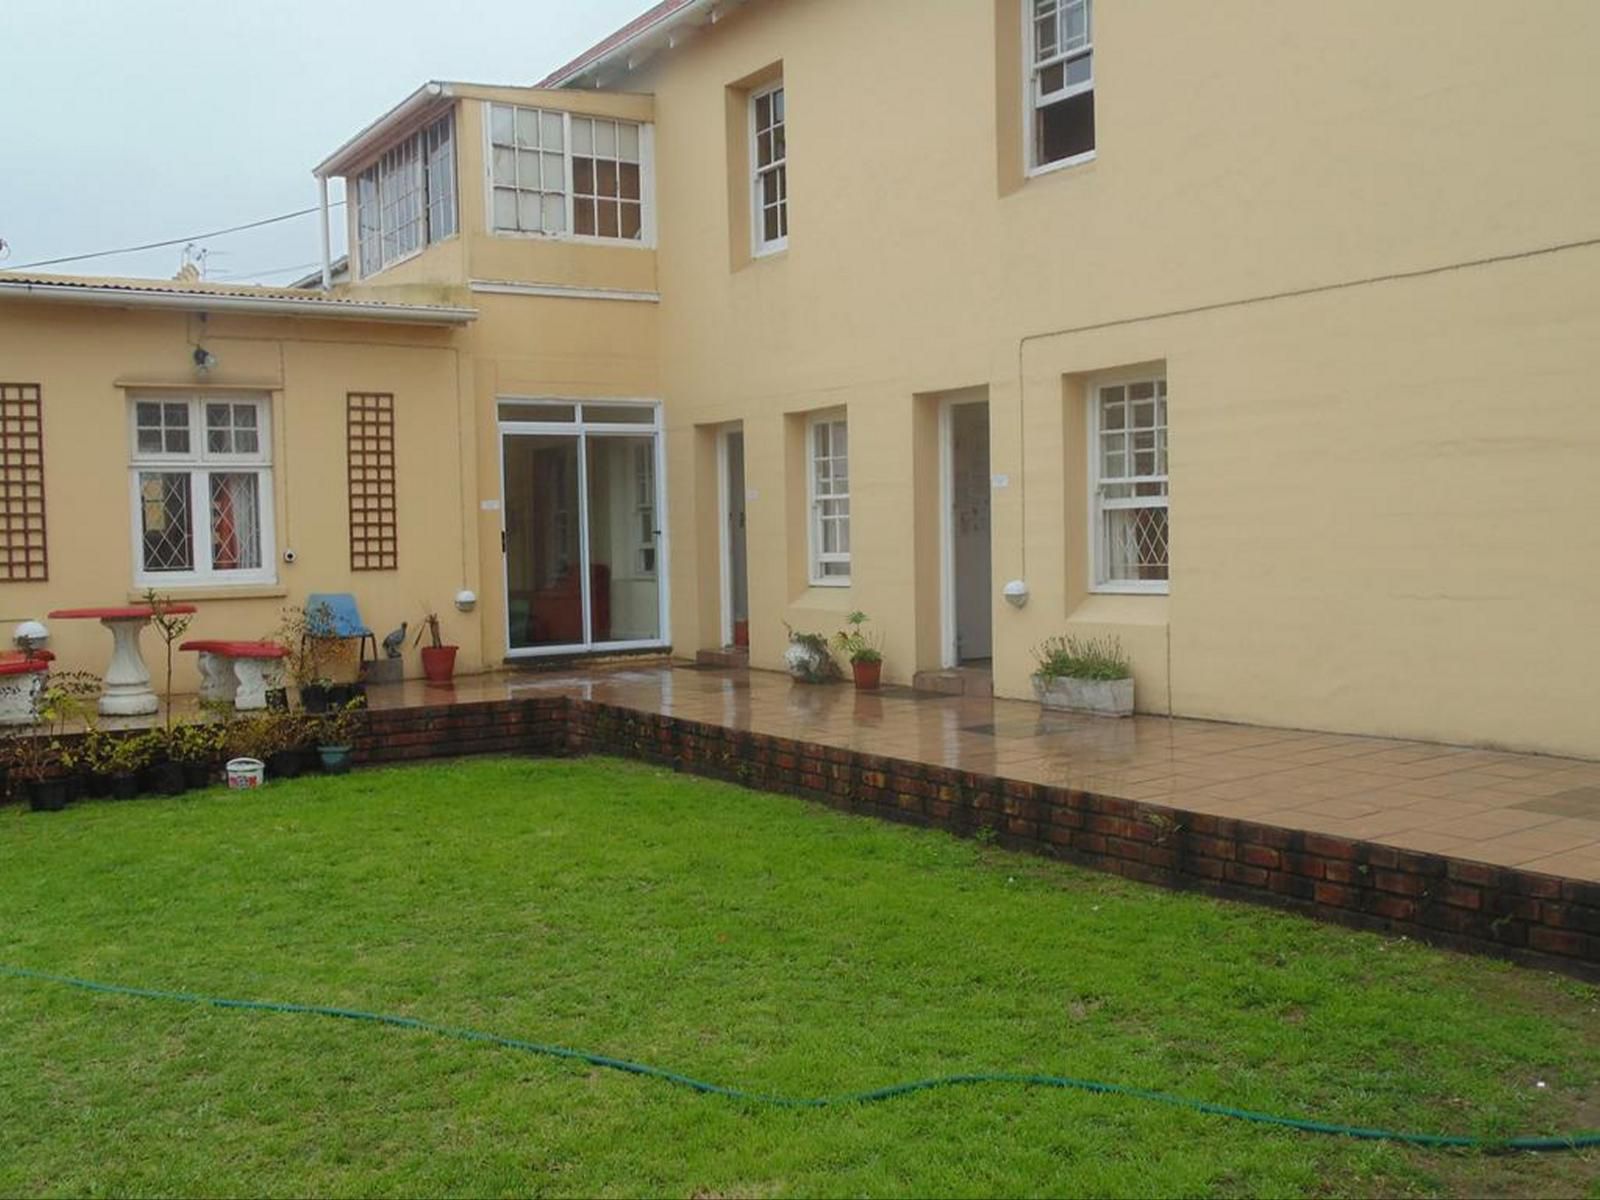 Jikeleza Backpackers Central Port Elizabeth Eastern Cape South Africa House, Building, Architecture